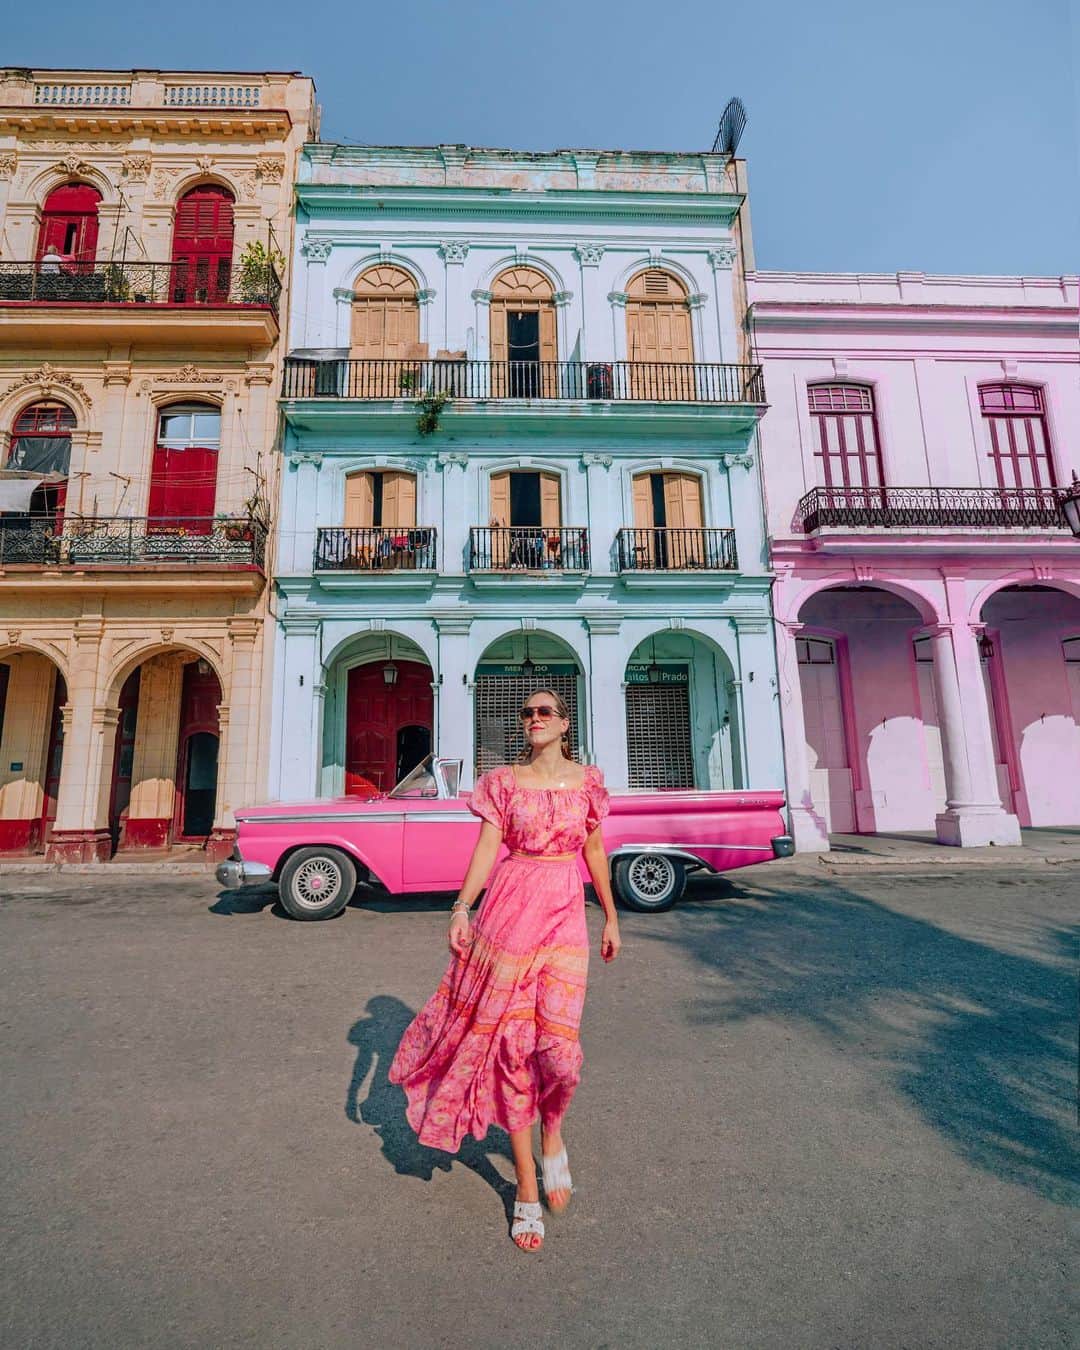 Izkizのインスタグラム：「Cruising around the colourful streets of Havana in a hot pink classic car 💕  One of the first things you notice as you arrive in Havana are the colourful vintage cars that line the streets. The classic car is as much of a Cuban icon as cigars, rum and Che Guevara. The streets of Cuba are like one big motor museum with Chevrolets, Buicks, Chryslers and Fords to Soviet-era Volgas and Ladas. 🚘   American cars were imported into Cuba for about 50 years, beginning near the early 20th century. After the Cuban Revolution, the U.S. embargo was erected and Castro banned the importation of American cars and mechanical parts. That’s why Cuba is the way it is today - essentially a living museum for classic cars! 🚗   #Havana #Cuba」